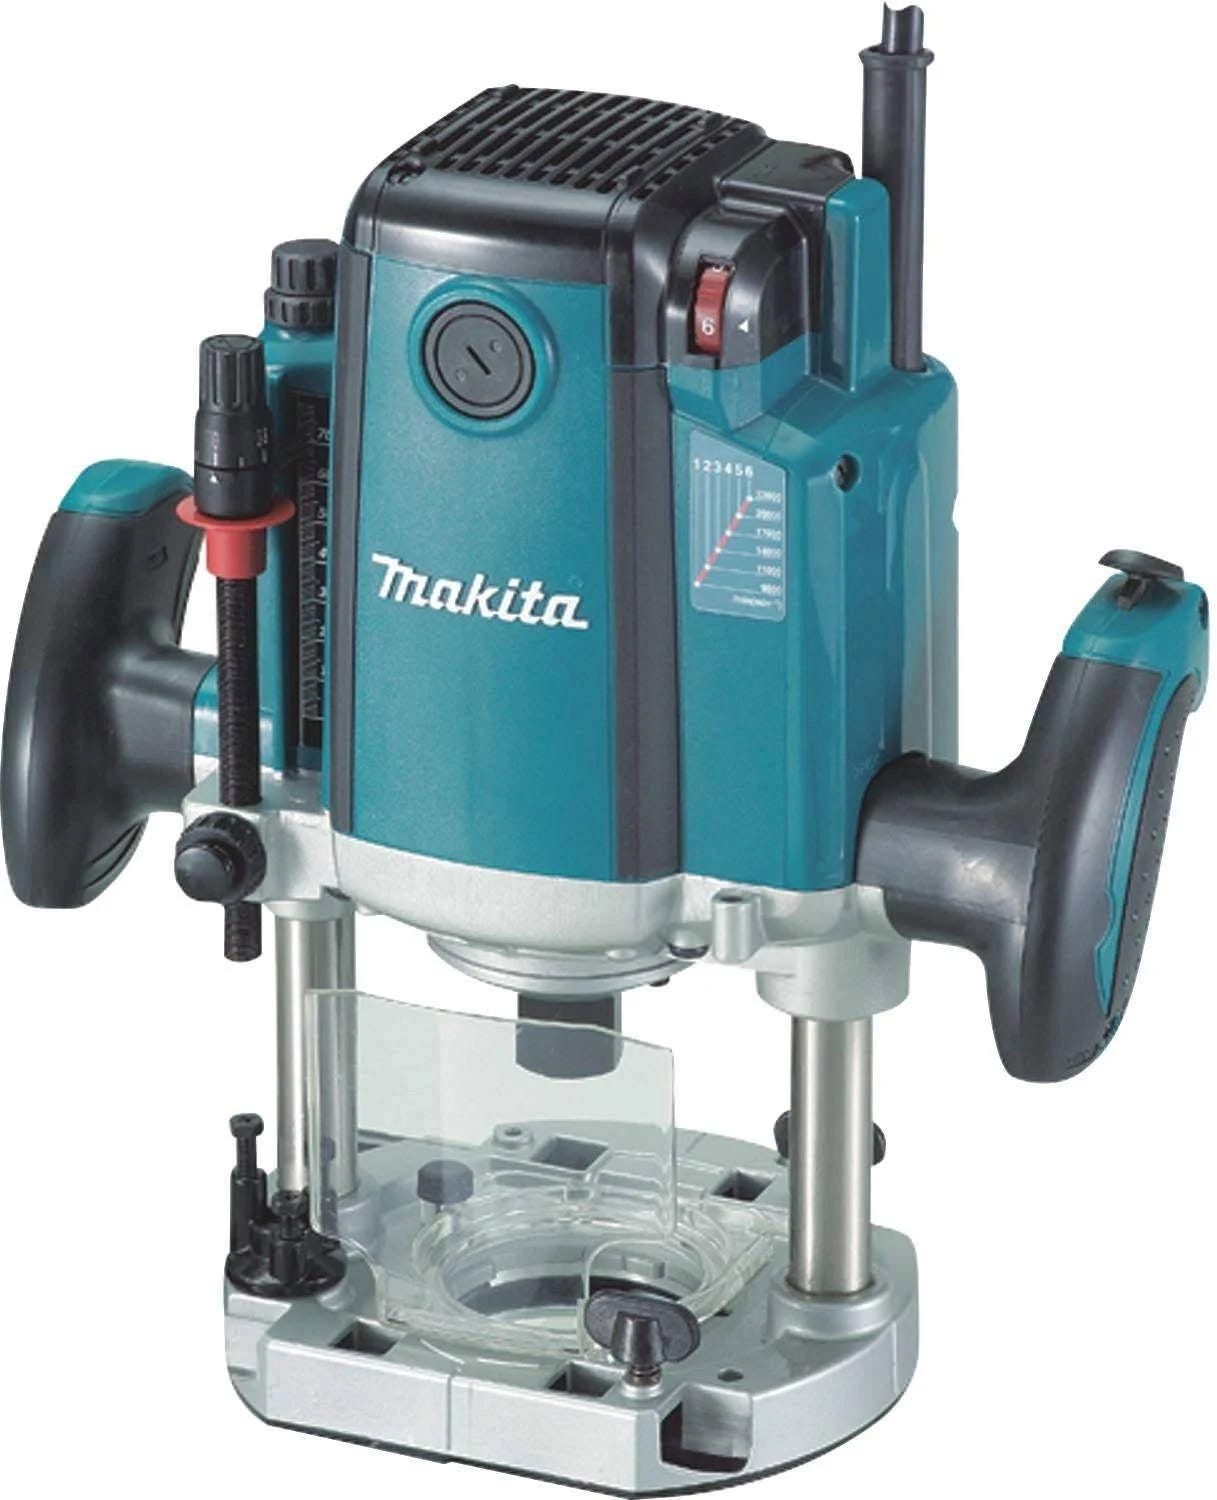 Makita RP2301FC 3-1/4 HP Plunge Router: Variable Speed and Ergonomic Features | Image